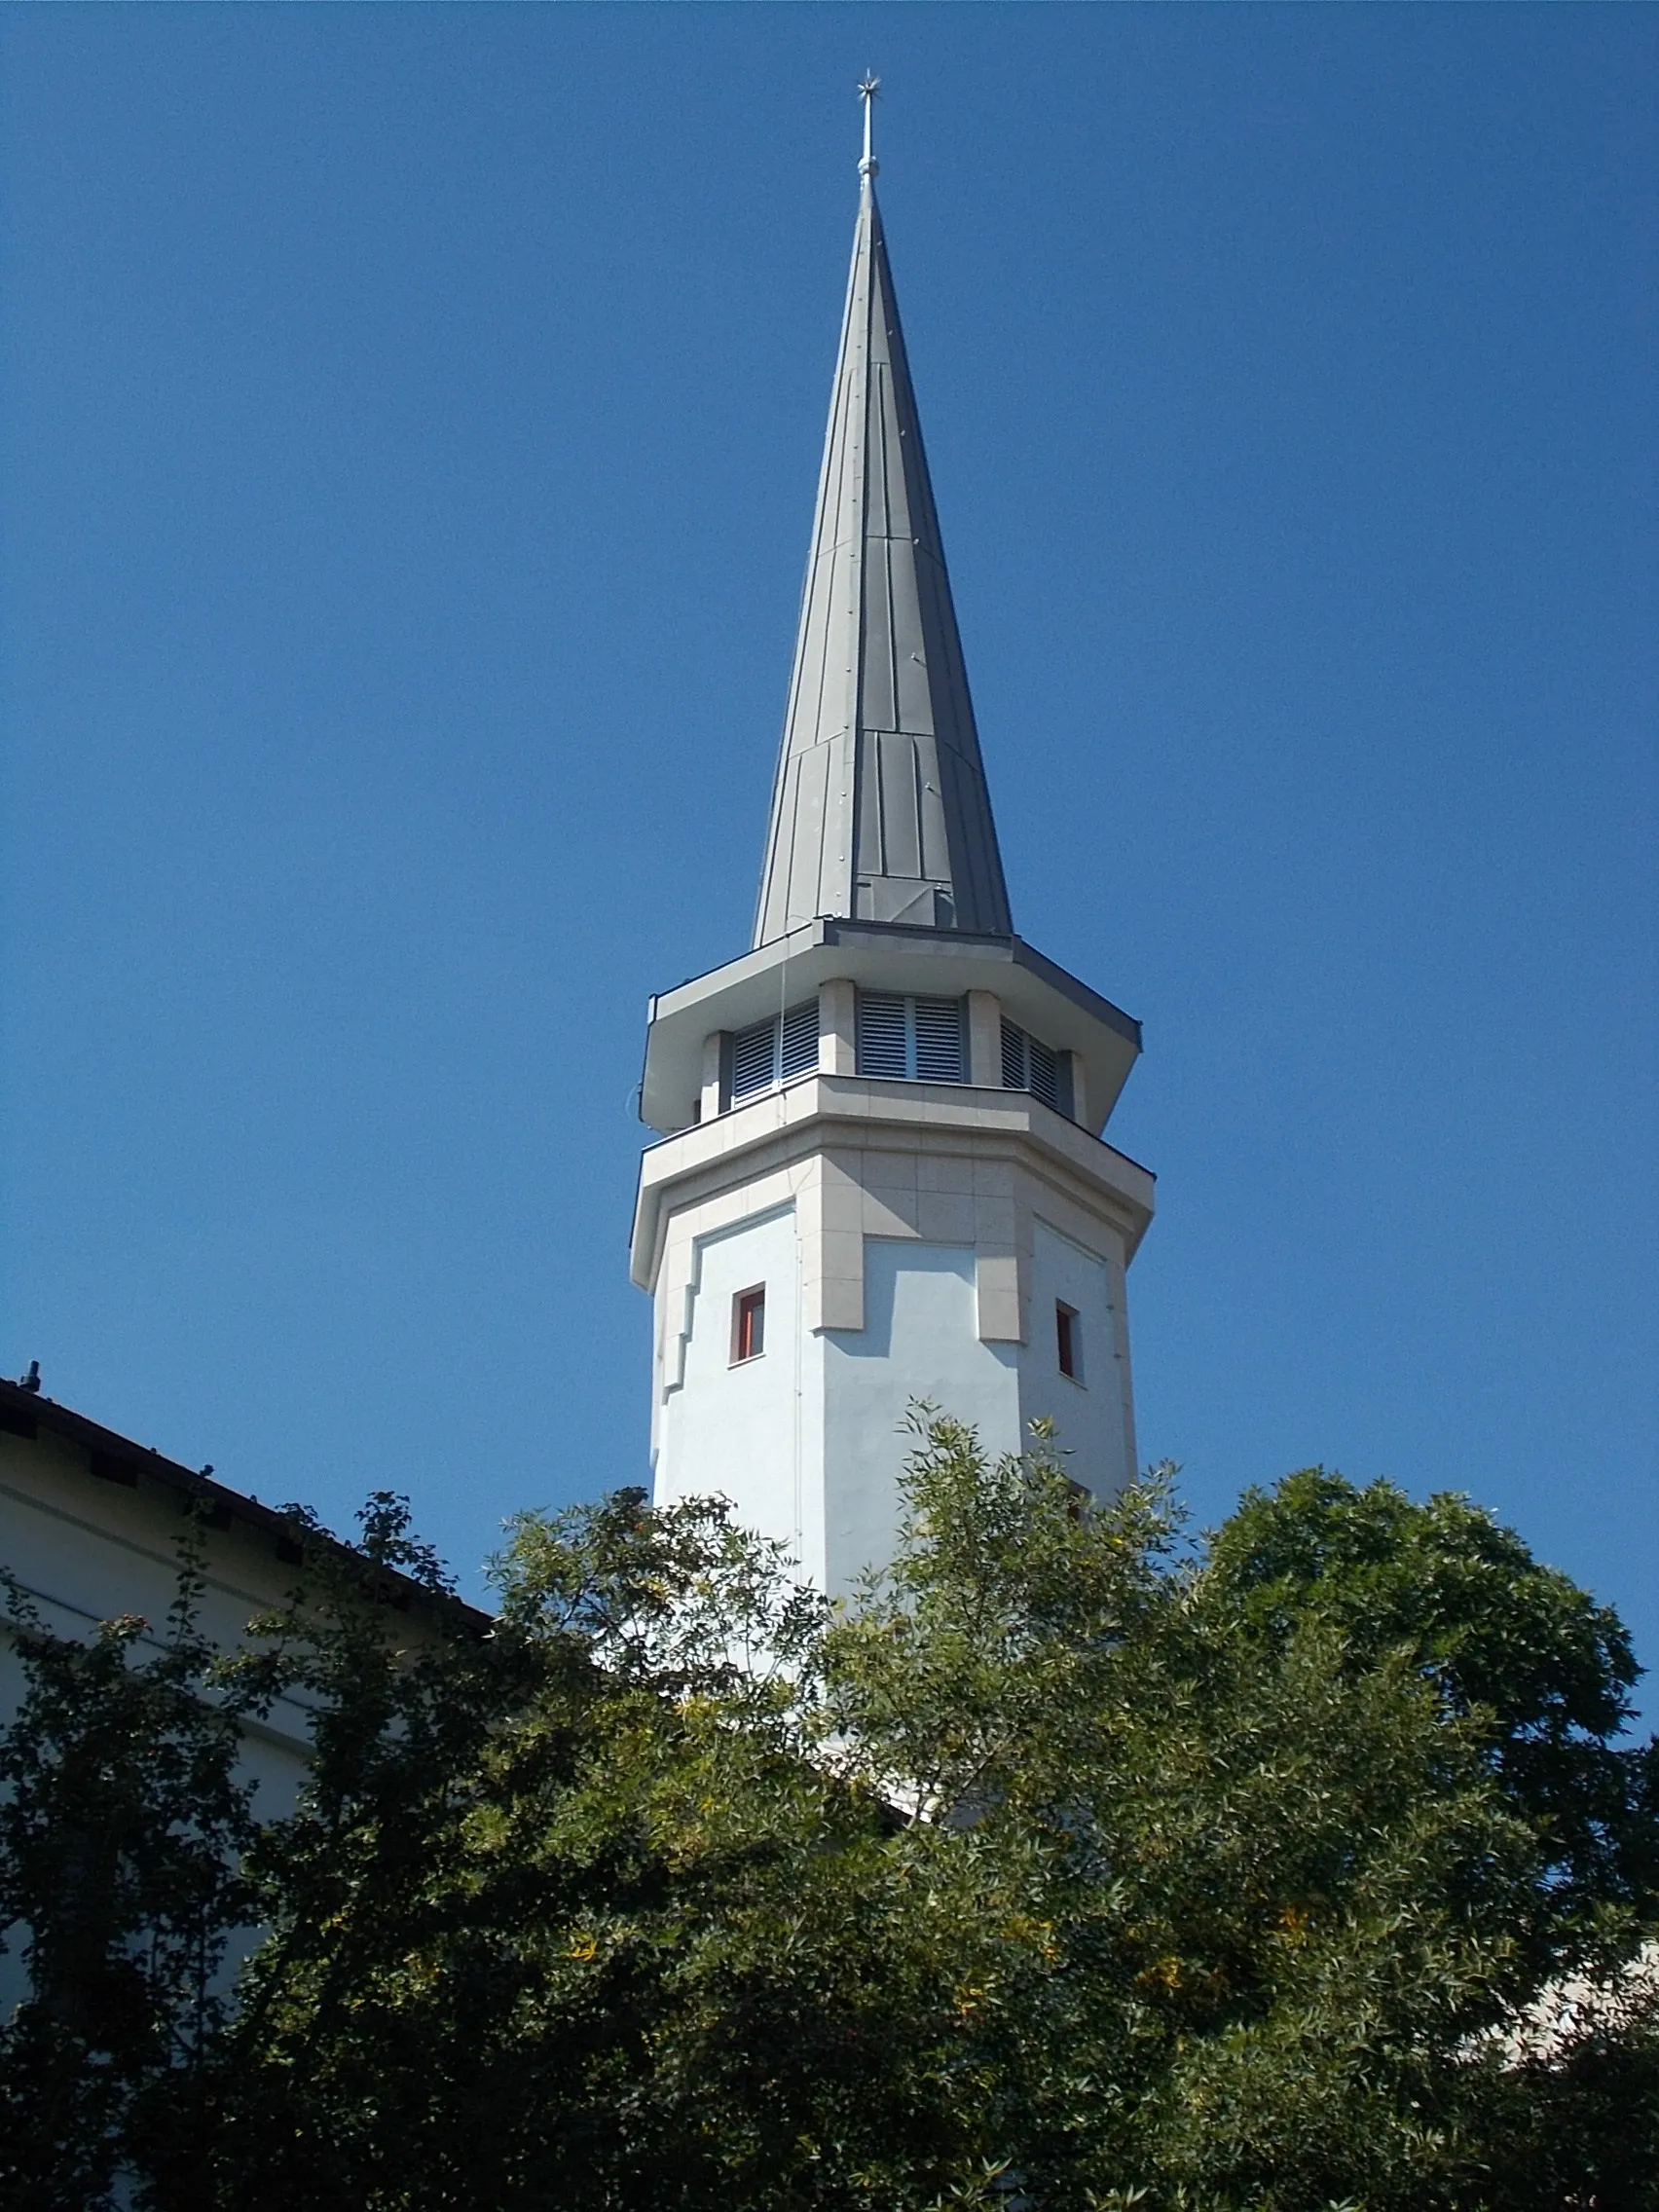 Photo showing: Budahegyvidéki Reformed Church (Est 1931). The community house was the former “Claridge” restaurant and café Architect: Lajos Wanda. Built in 1932.  In 1995 gallery built and a 33m high, 'transylvanian-like' tower  Architects: Mária Nyíri and László Varga. Furniture planned (partly made too) by designer György Fekete. Pulpit and wooden ceilings are József Barabás Transylvainan woodcarver works. Steel belfry in the garden 1948 works. - Beethoven Street and 28 Böszörményi Road corner, Németvölgy neighbourhood, 12th district of Budapest.